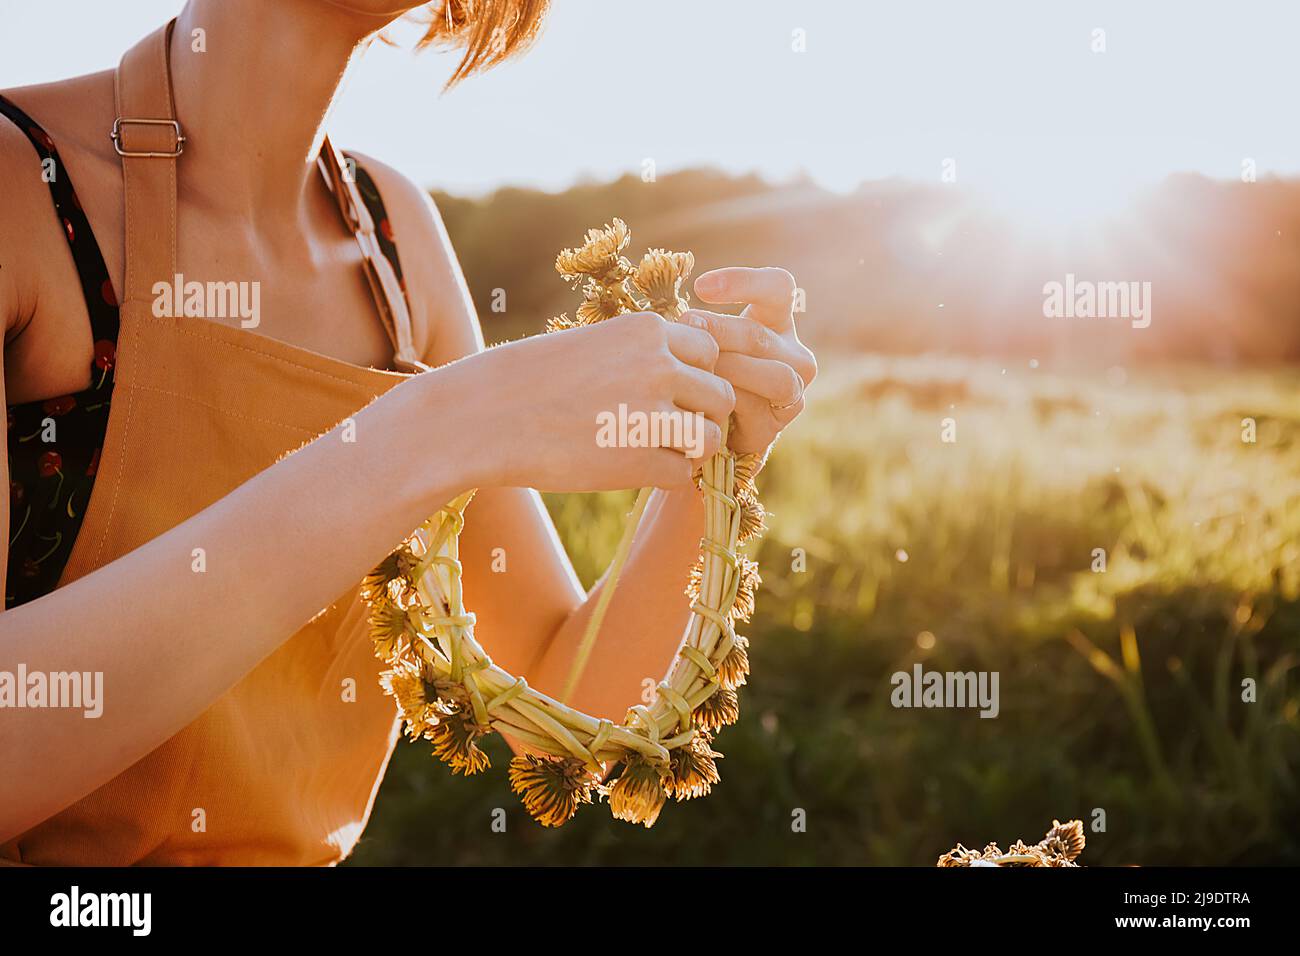 Portrait of beautiful woman making wreath of flowers dandelions on flowering field. Summer lifestyle, nature lover and freedom concept. Florist worksh Stock Photo